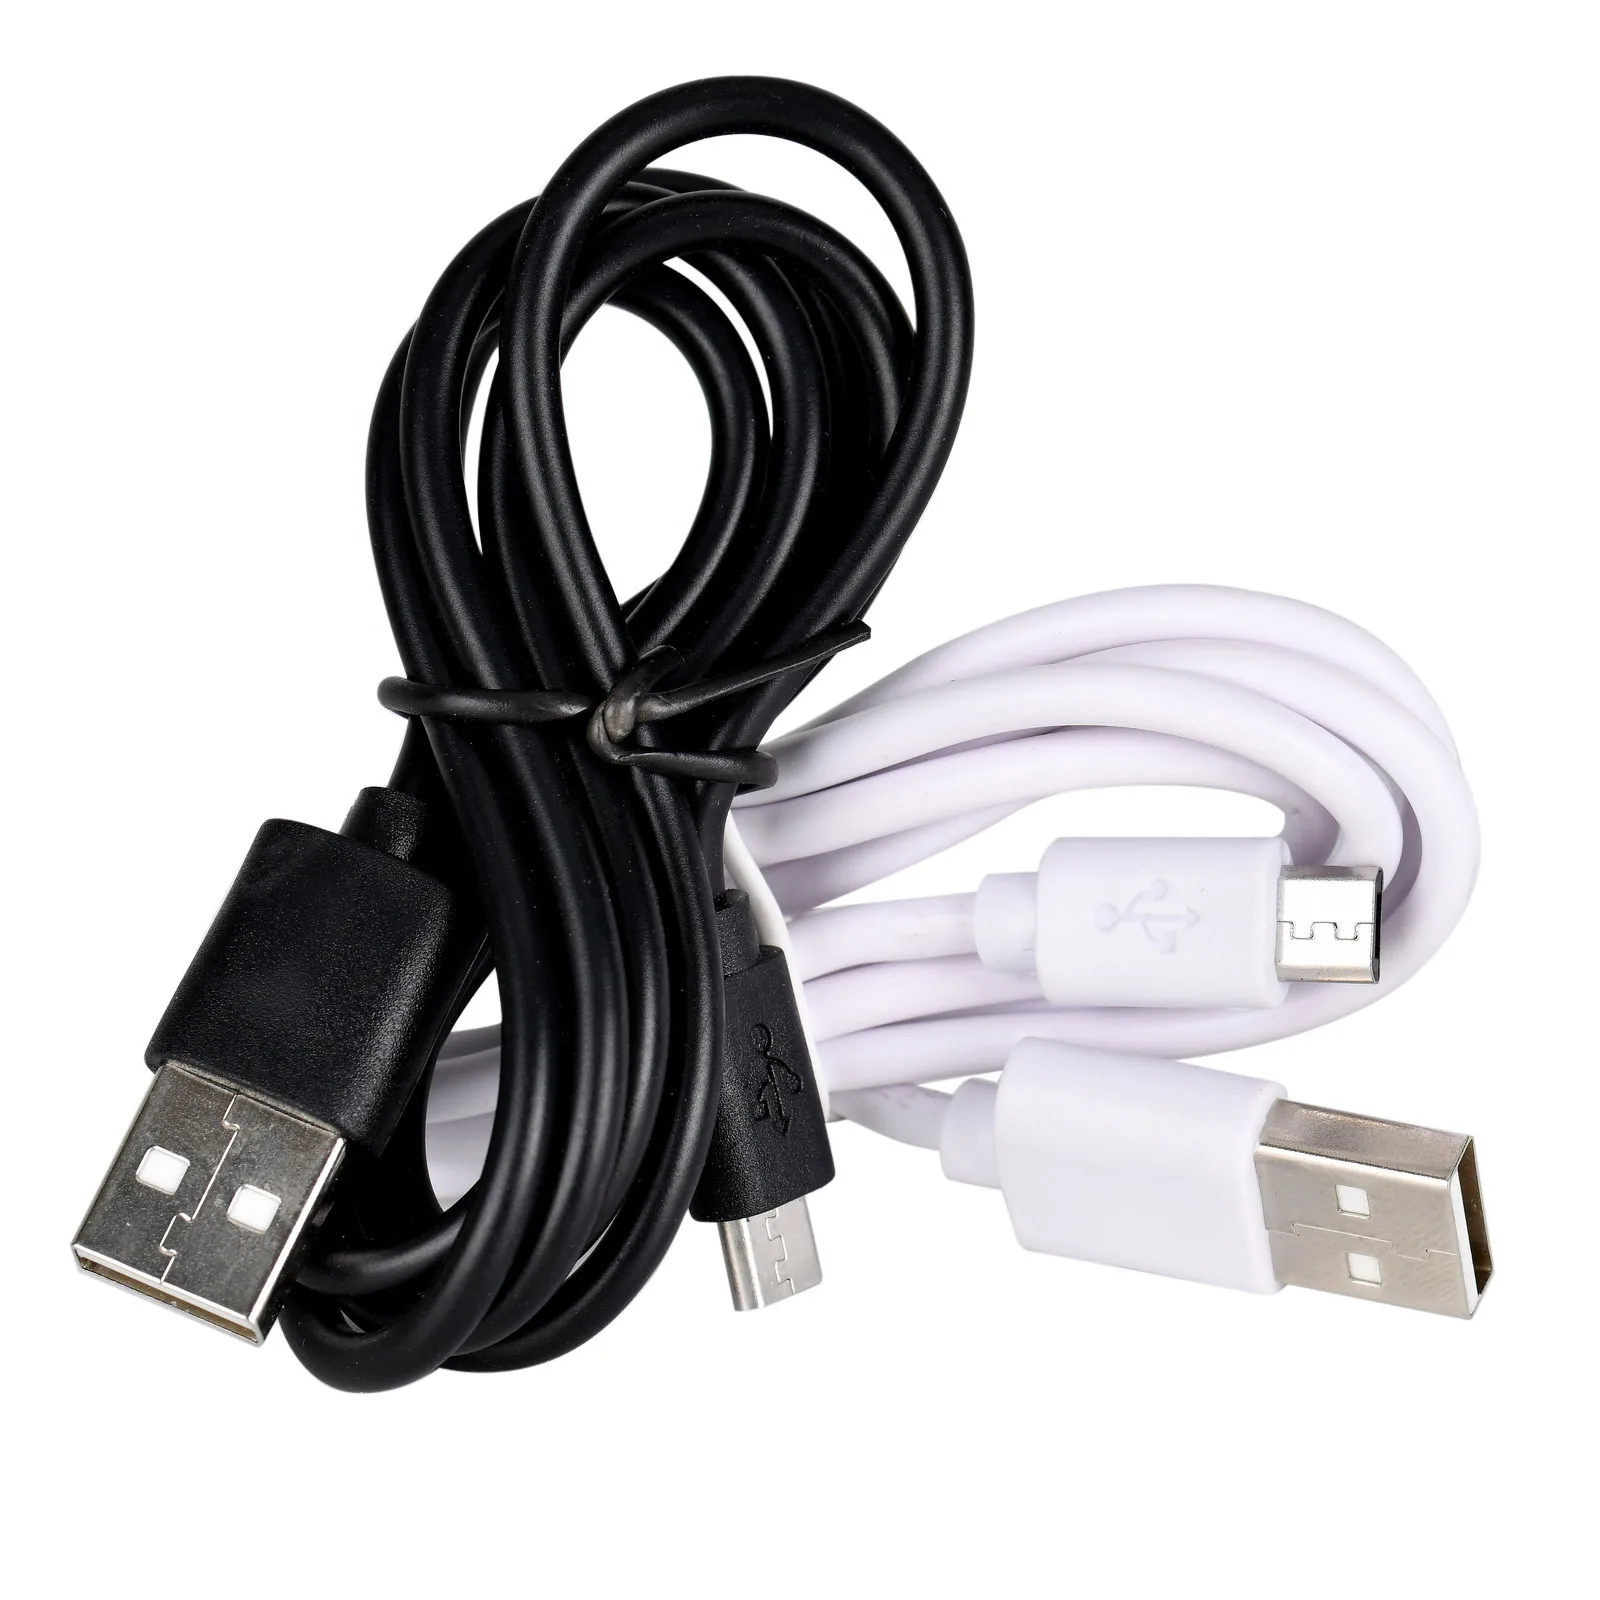 

USB Cable Micro V8 Android 2 in 1 Functionality Data Sync & Charger Cables Lead Cable For Cheapest Charging Cord